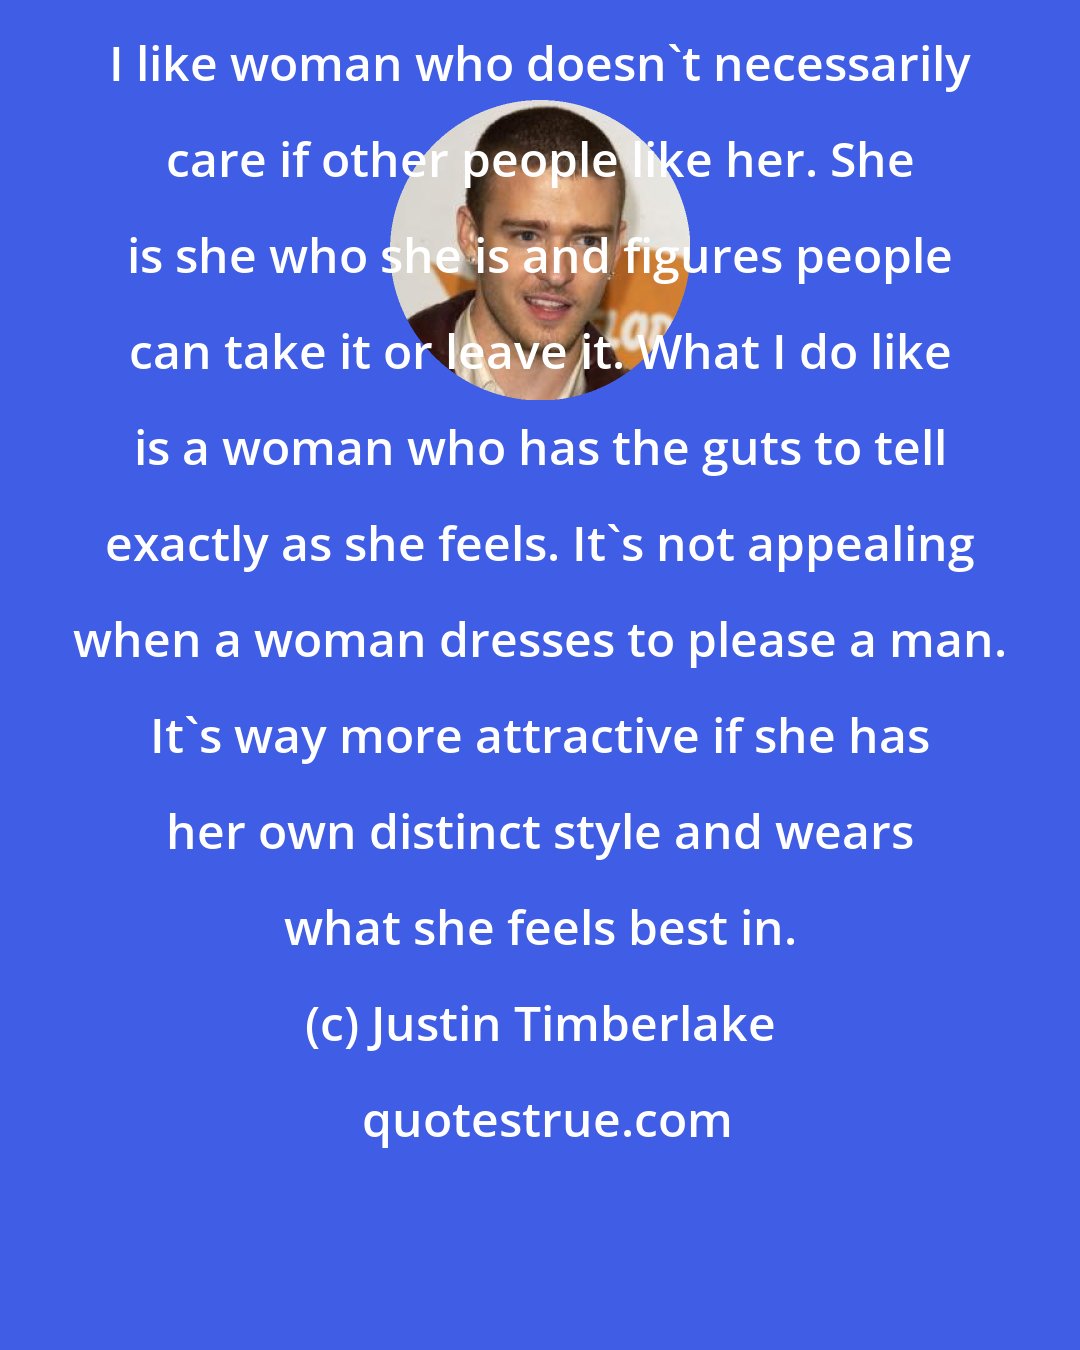 Justin Timberlake: I like woman who doesn't necessarily care if other people like her. She is she who she is and figures people can take it or leave it. What I do like is a woman who has the guts to tell exactly as she feels. It's not appealing when a woman dresses to please a man. It's way more attractive if she has her own distinct style and wears what she feels best in.